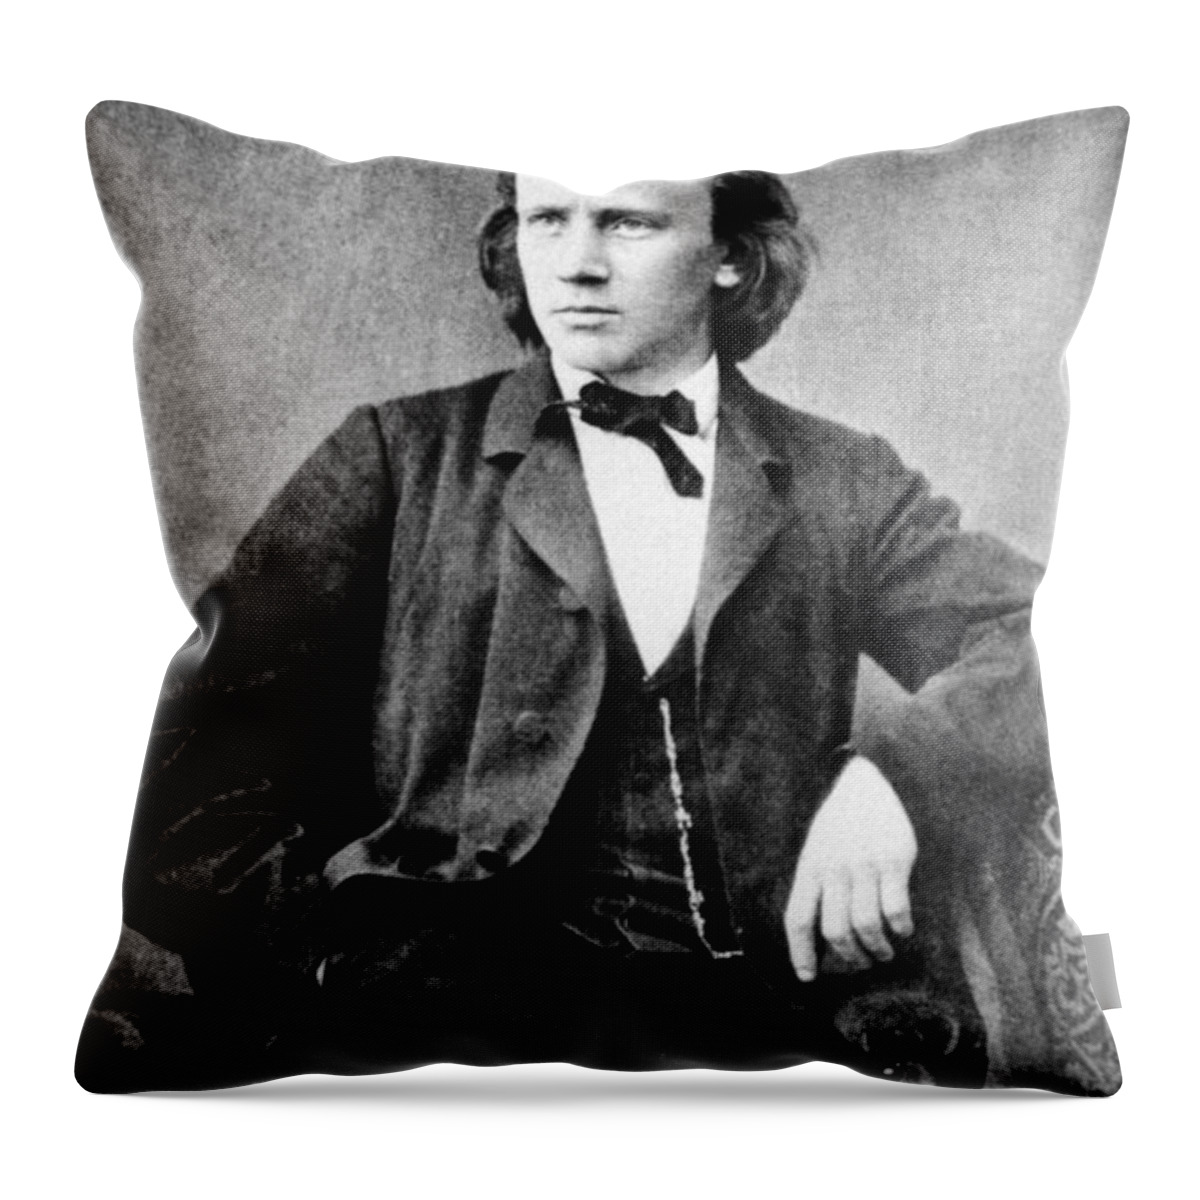 History Throw Pillow featuring the photograph Johannes Brahms, German Composer by Omikron